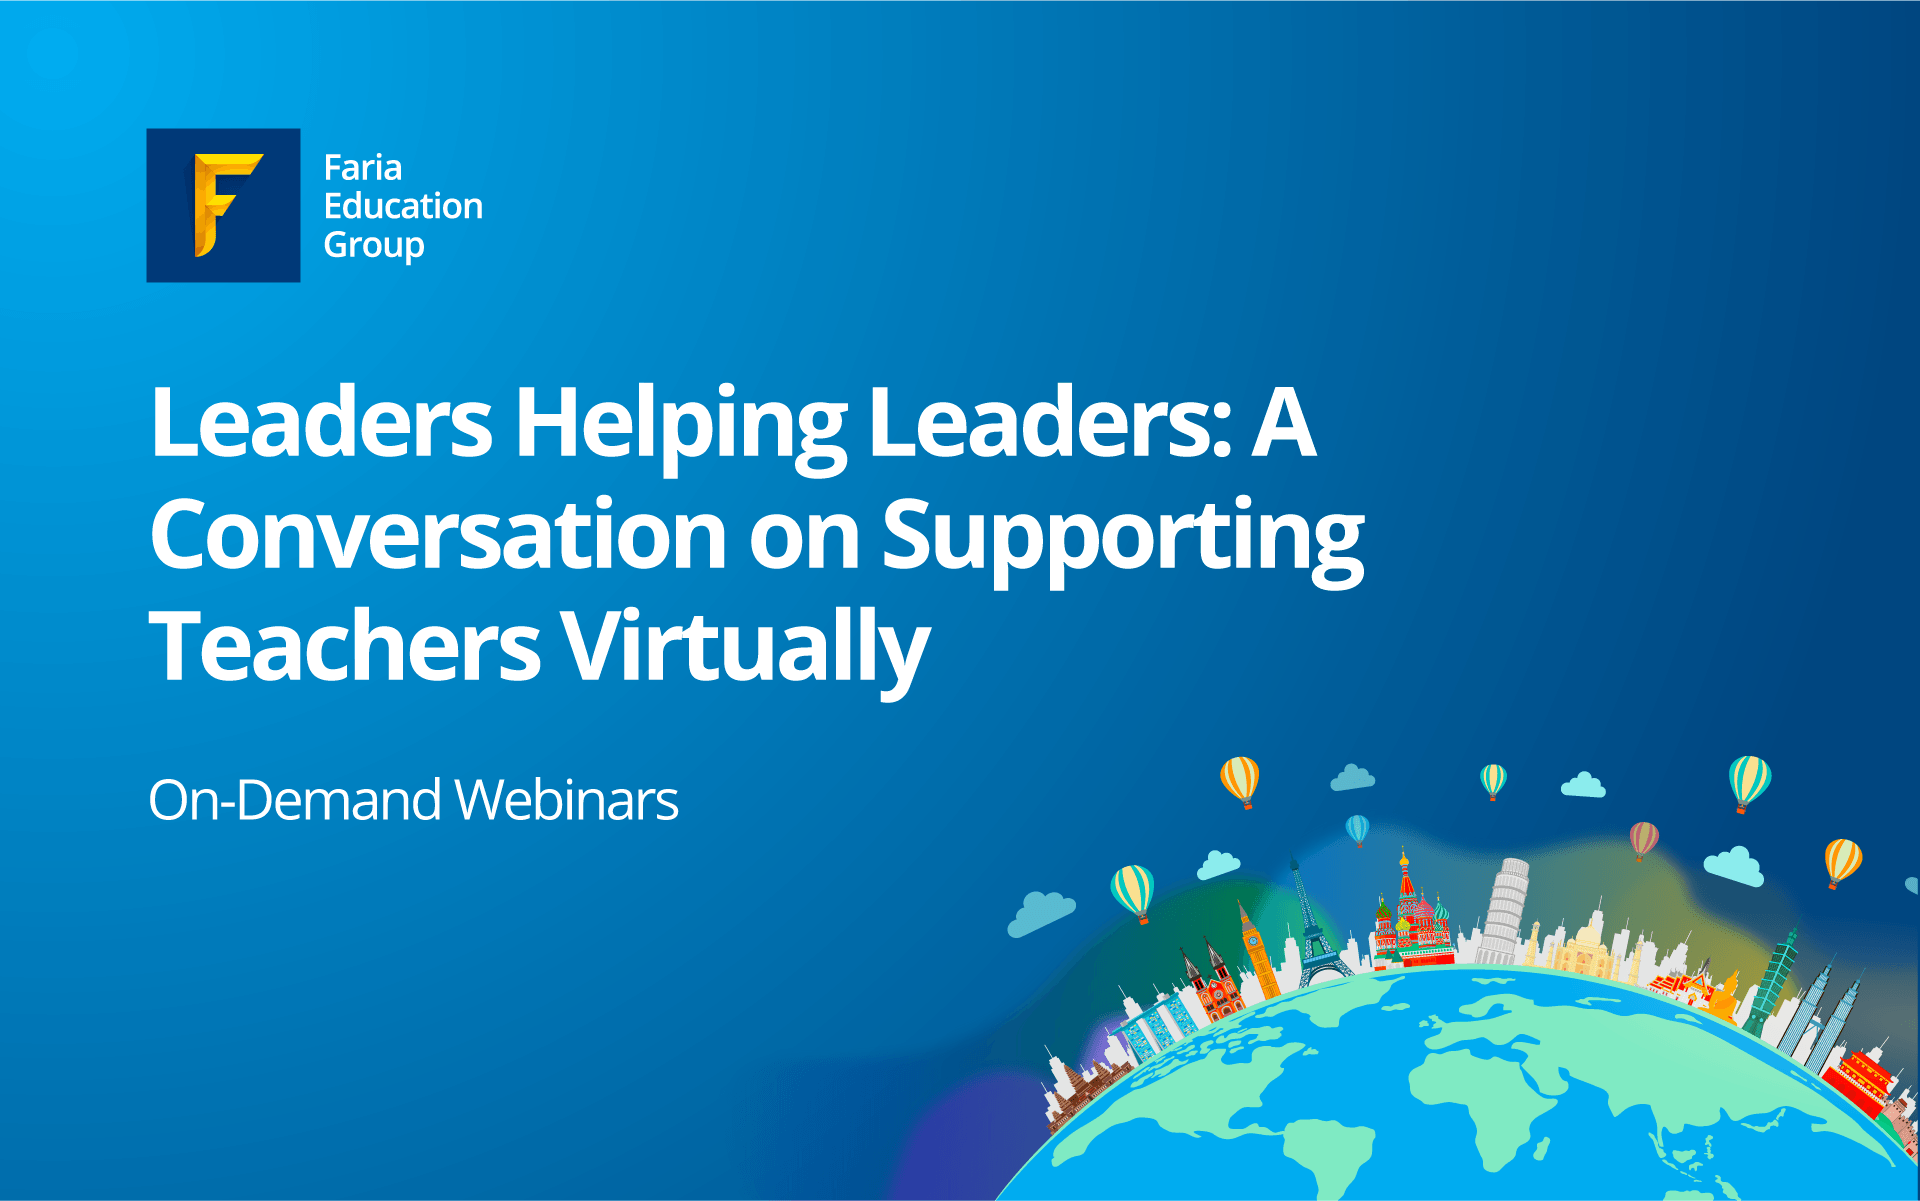 Leaders Helping Leaders: A Conversation on Supporting Teachers Virtually